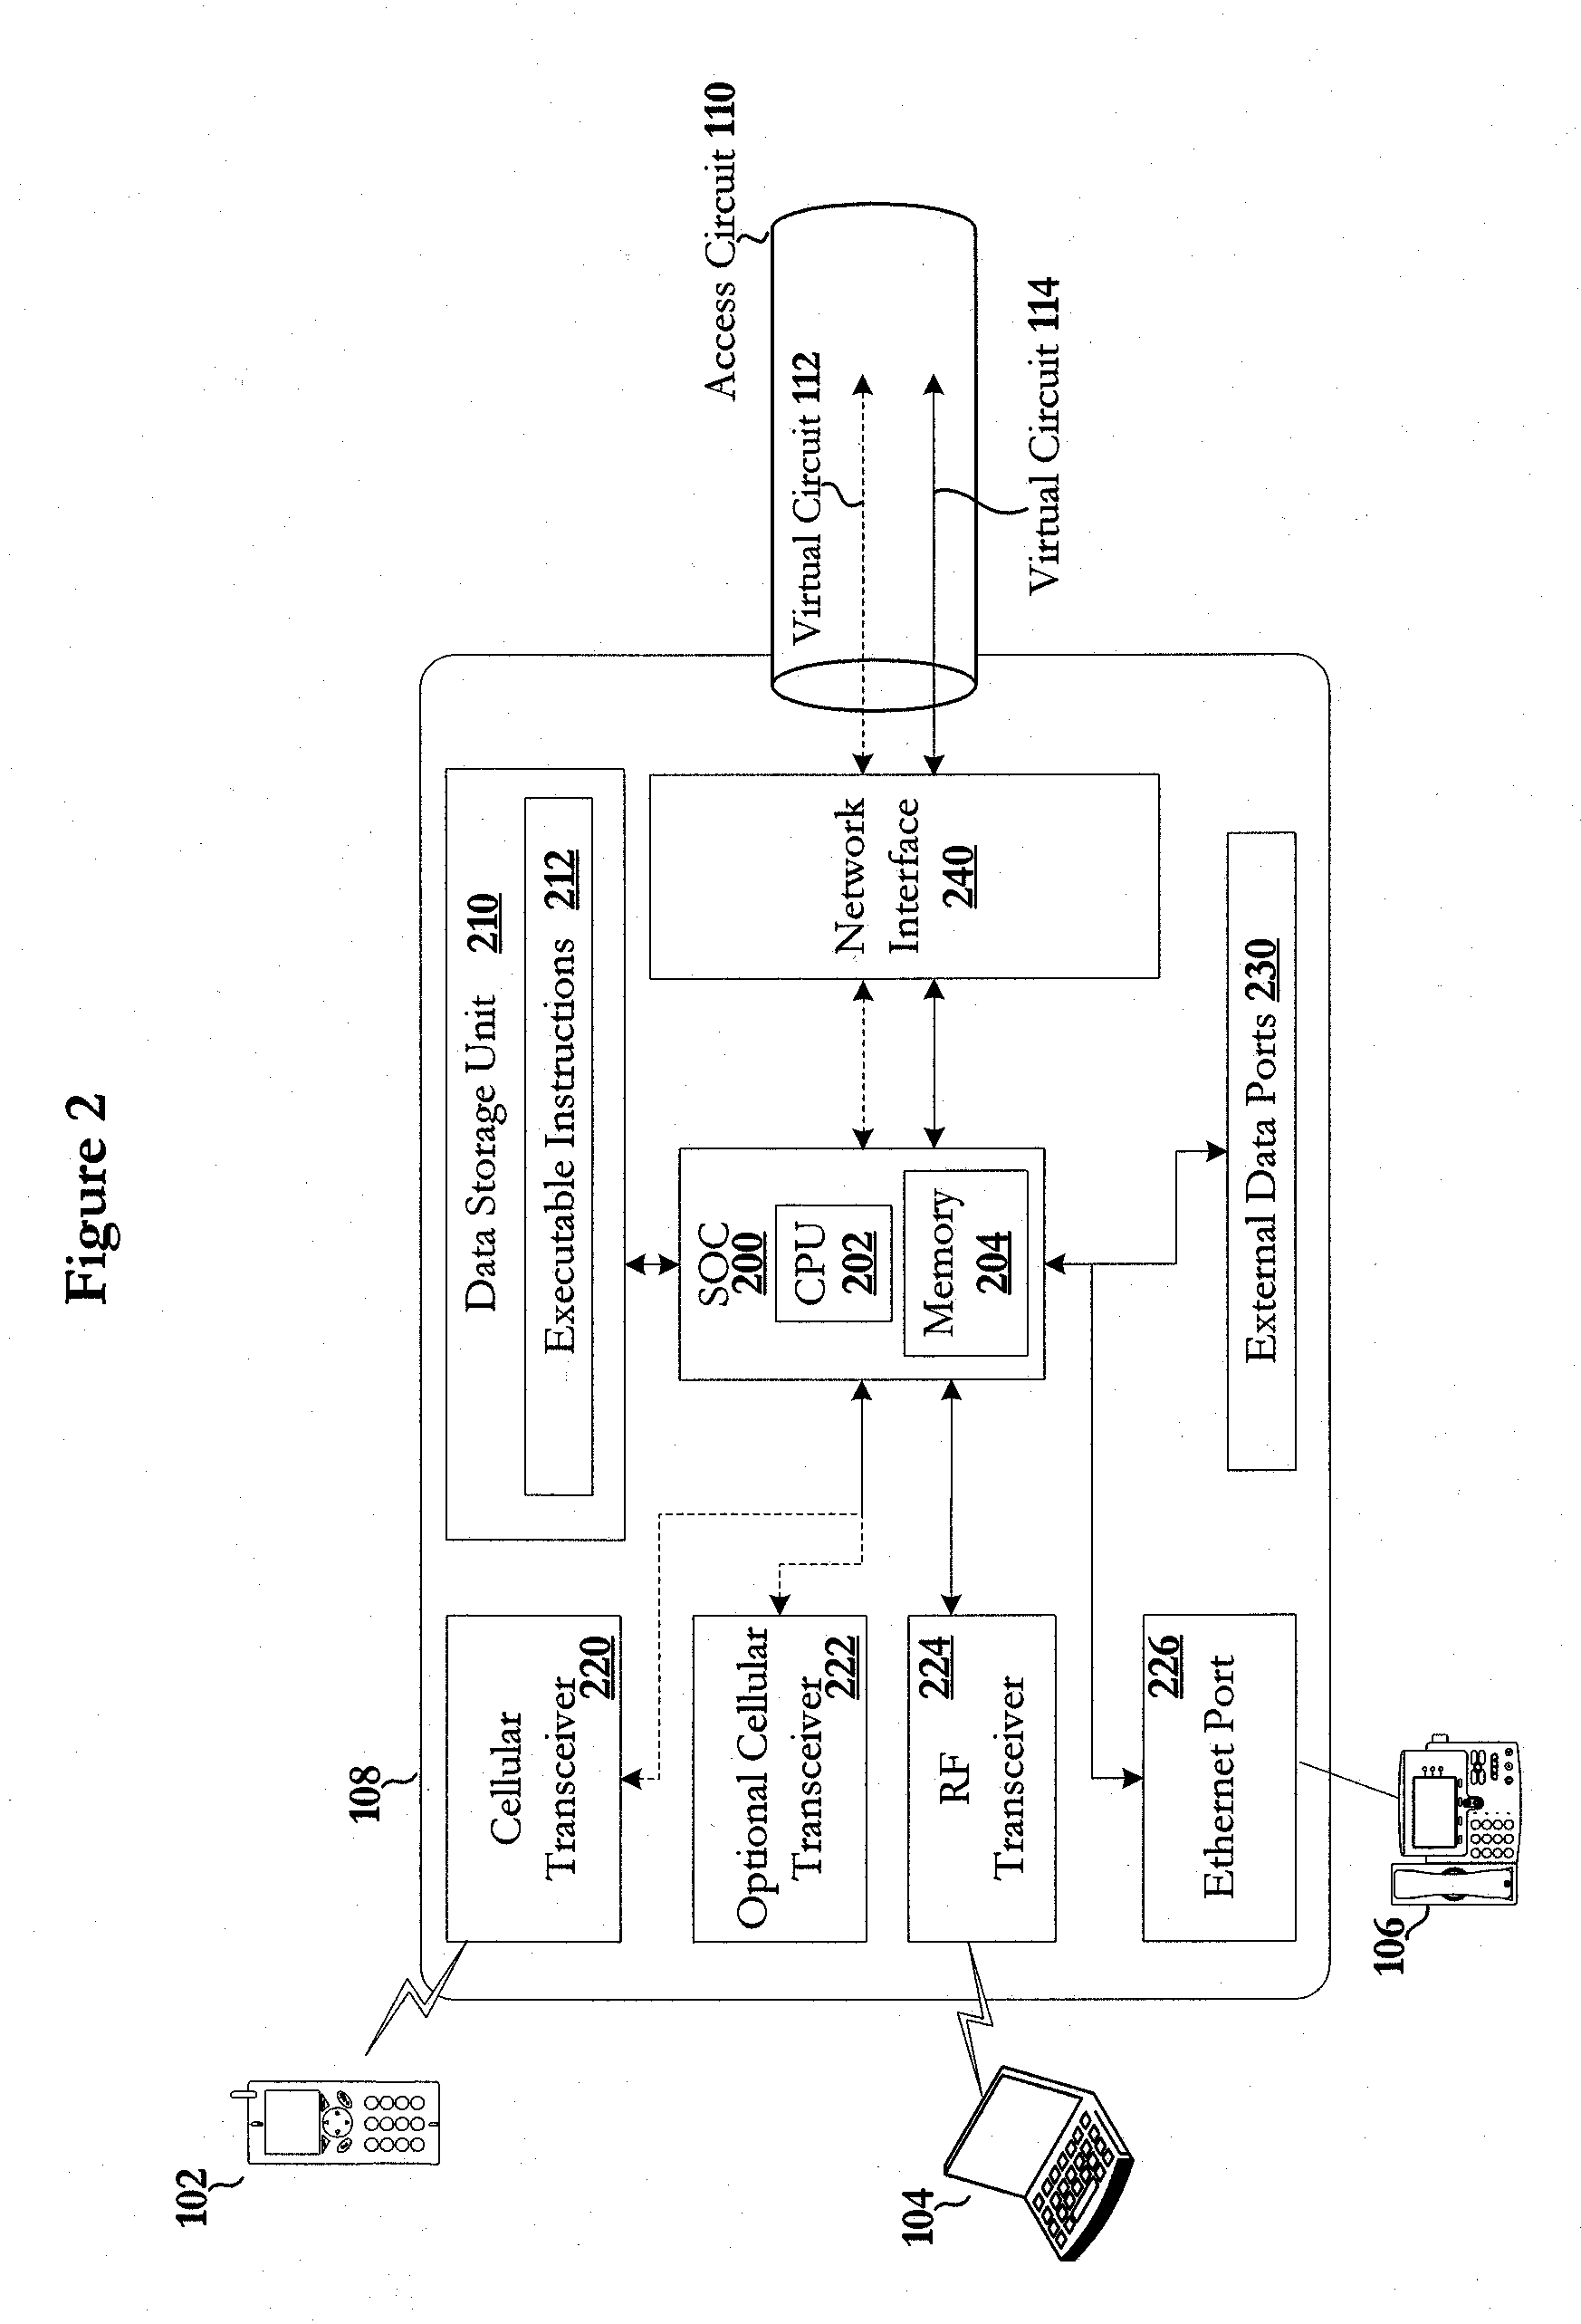 System and method for providing end to end quality of service for cellular voice traffic over a data network